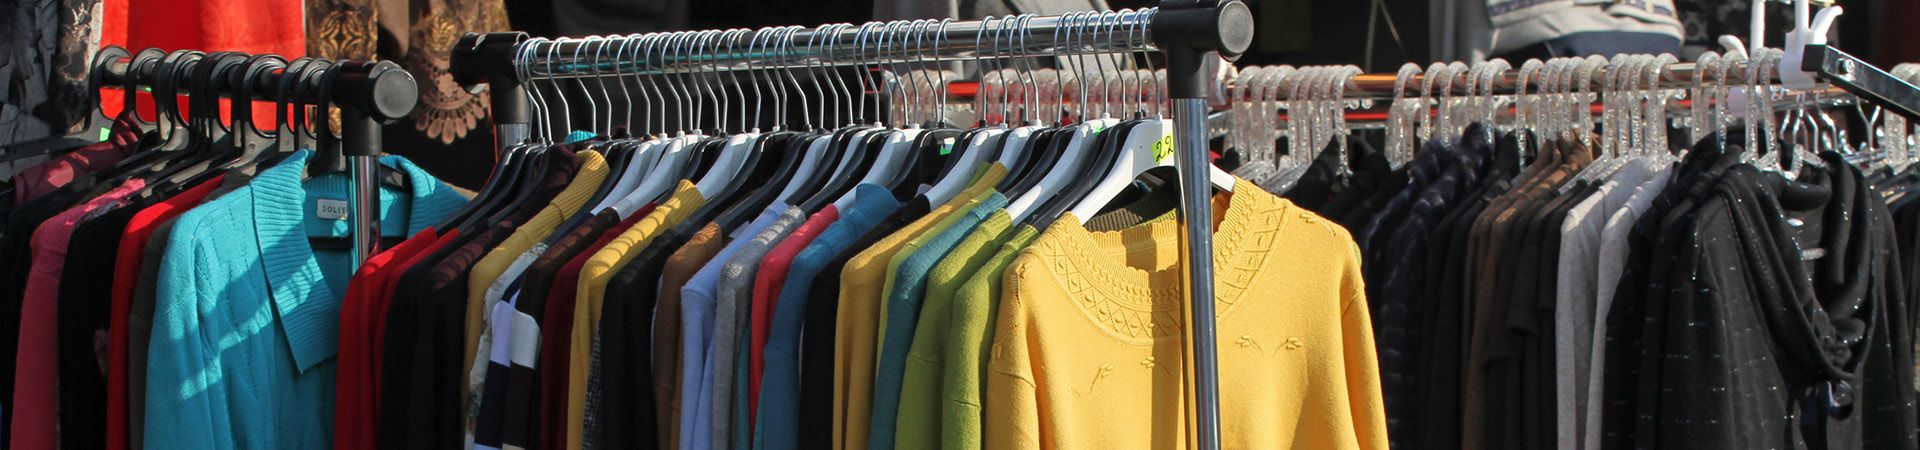 Clothing that is still in good condition is often sold as second-hand goods.